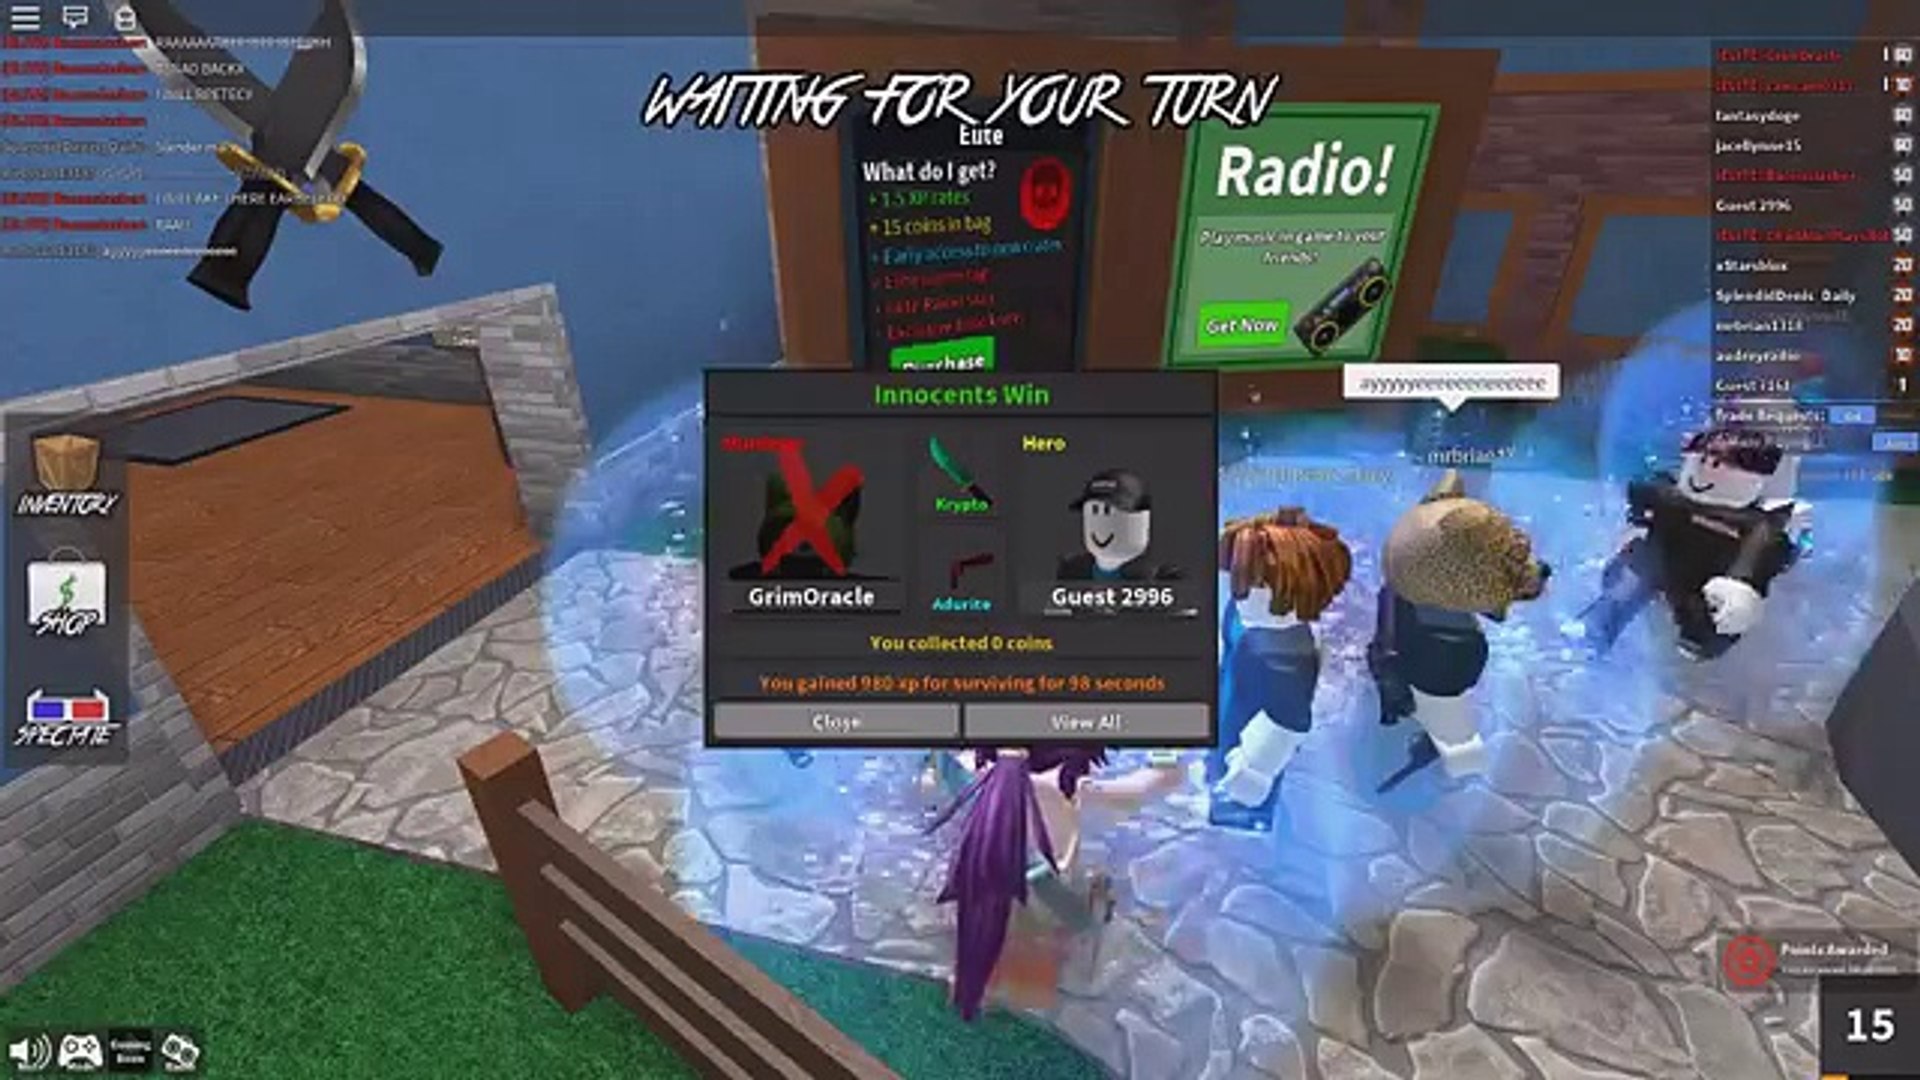 Roblox Lets Play Murder Mystery 2 Radiojh Games Gamer Chad Slg 2020 - codes for murder mystery 2 in roblox 2018